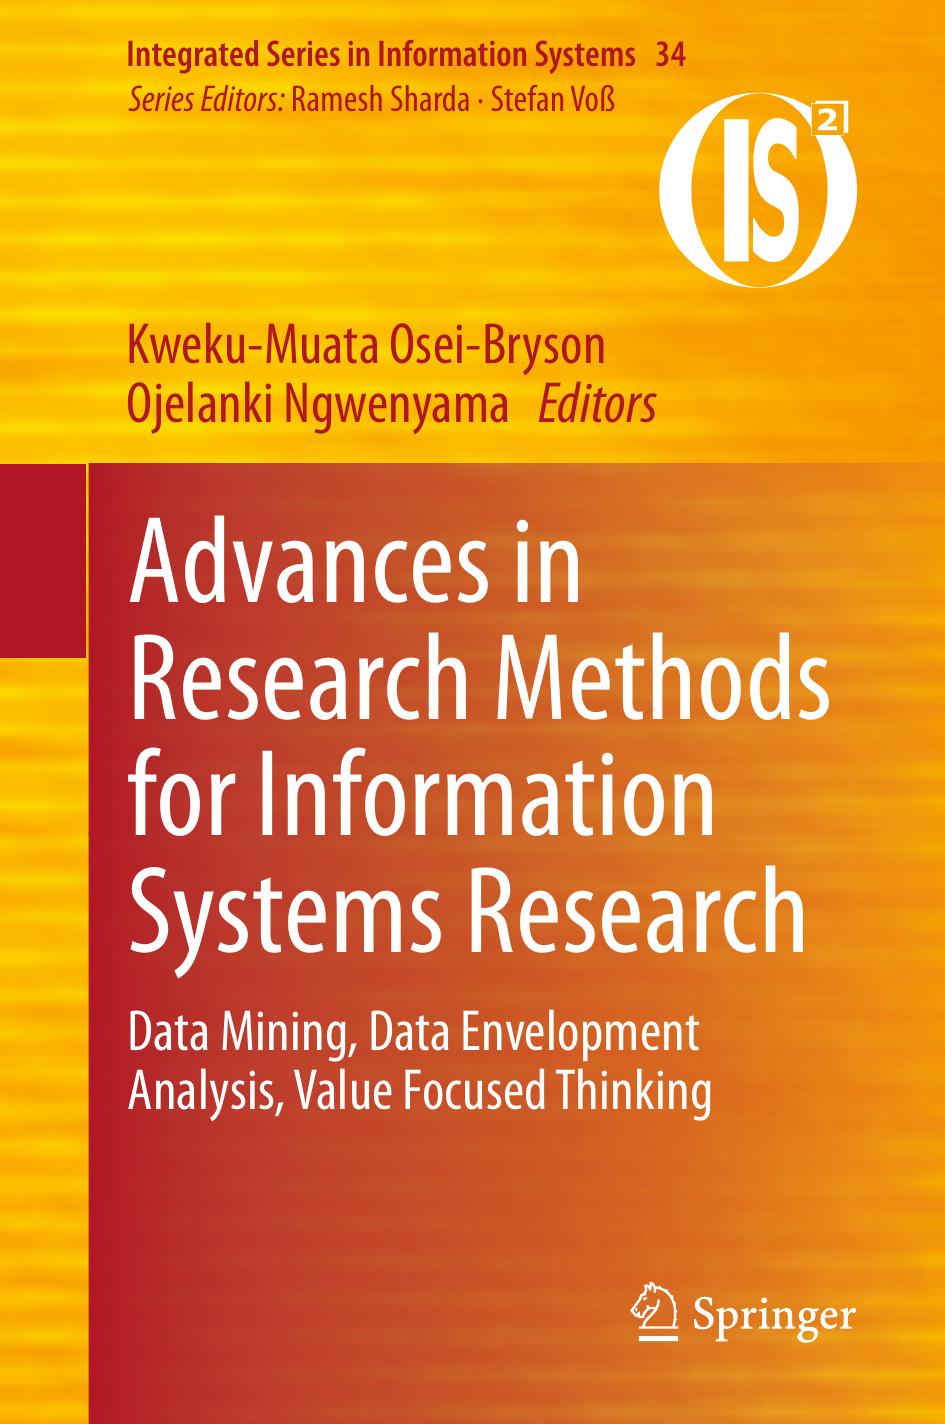 Advances in Research Methods for Information Systems Research  Data Mining, Data Envelopment Analysis 2014